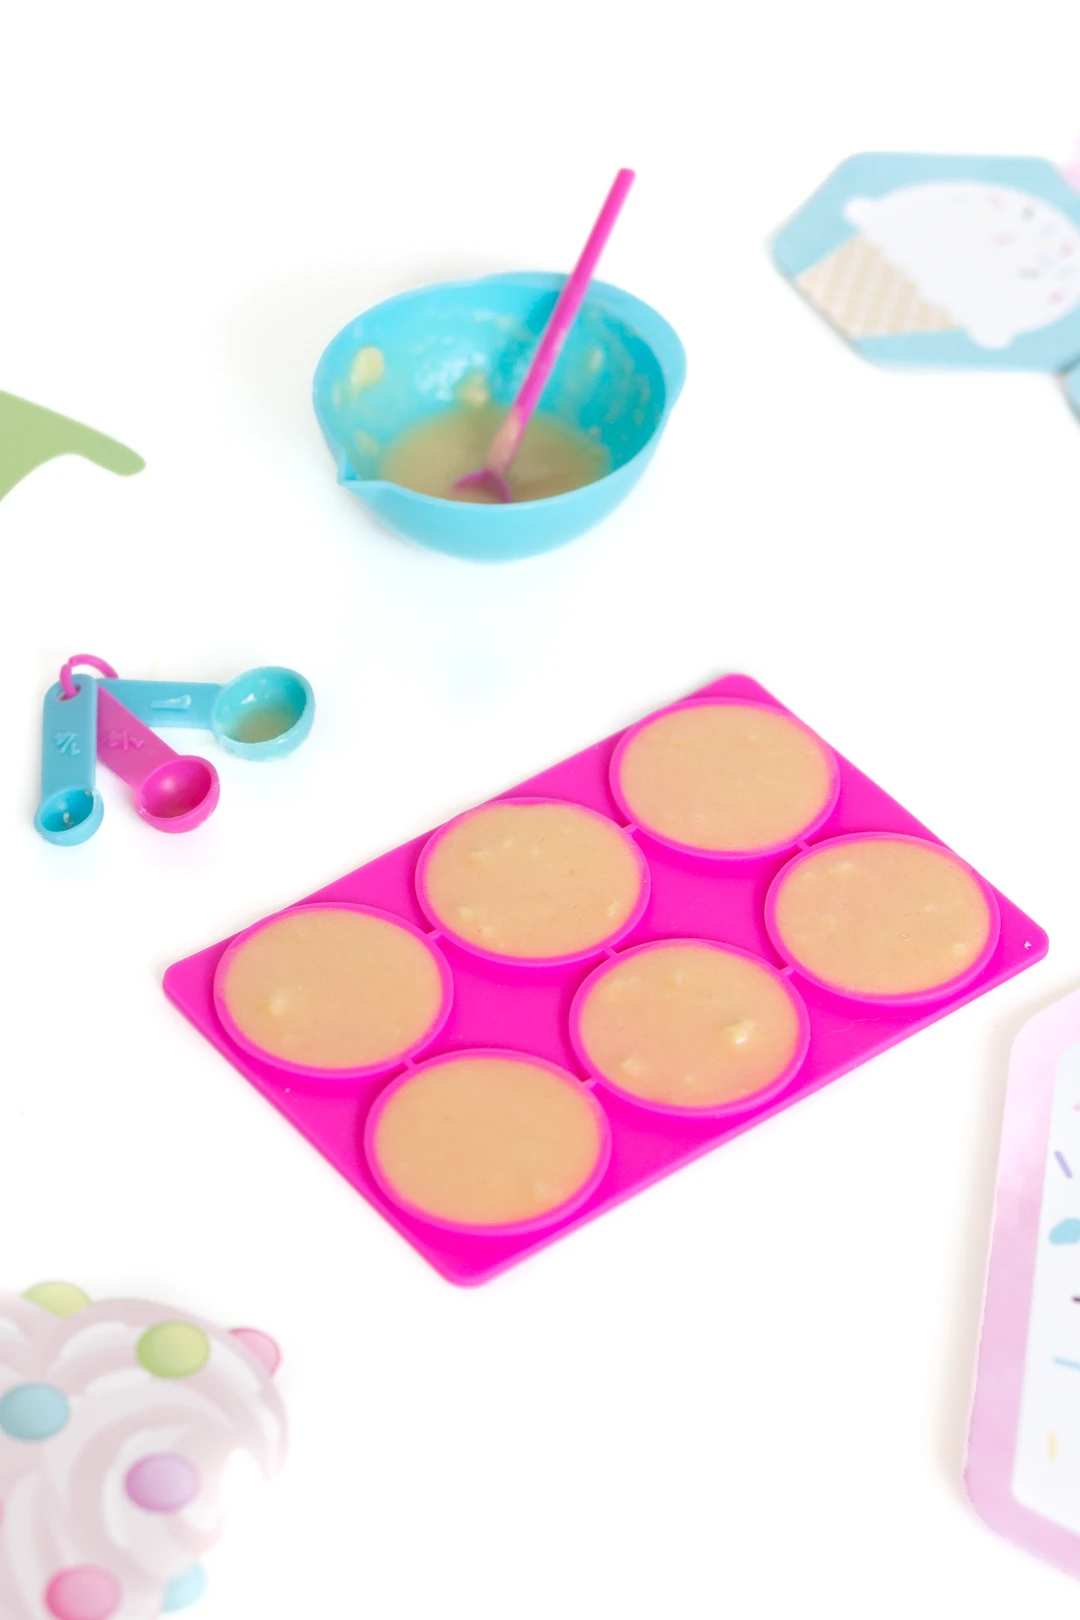 all of the recipes in the tiny baking kit｜TikTok Search